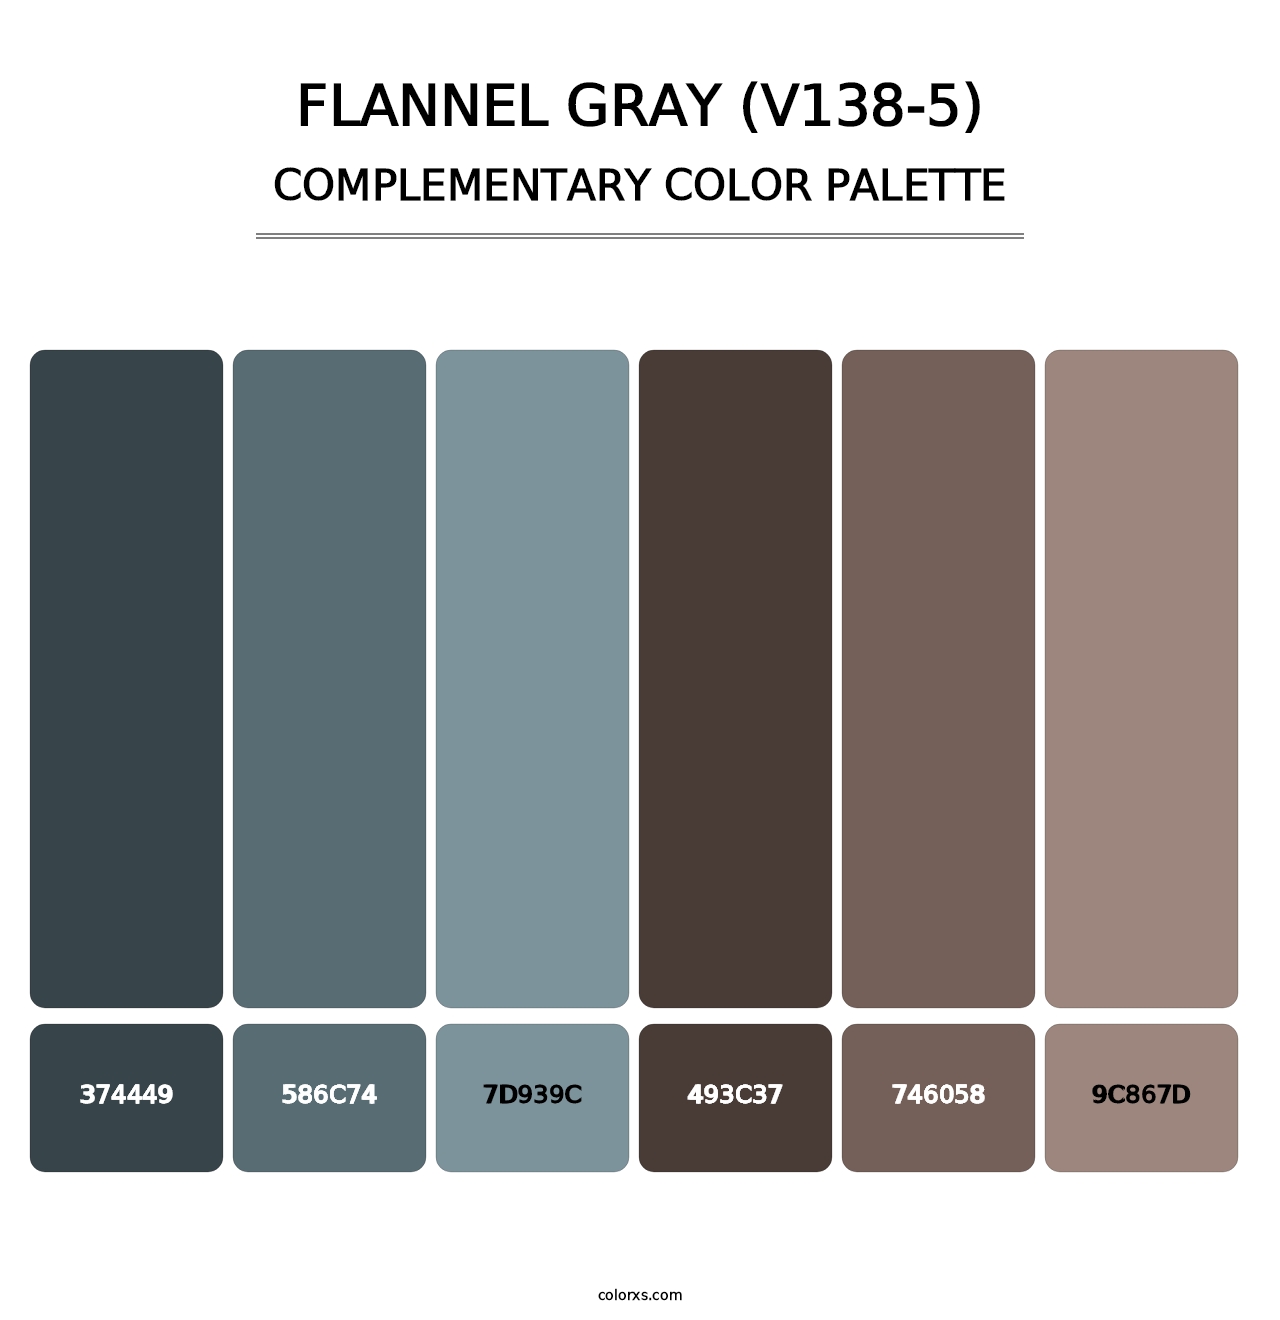 Flannel Gray (V138-5) - Complementary Color Palette